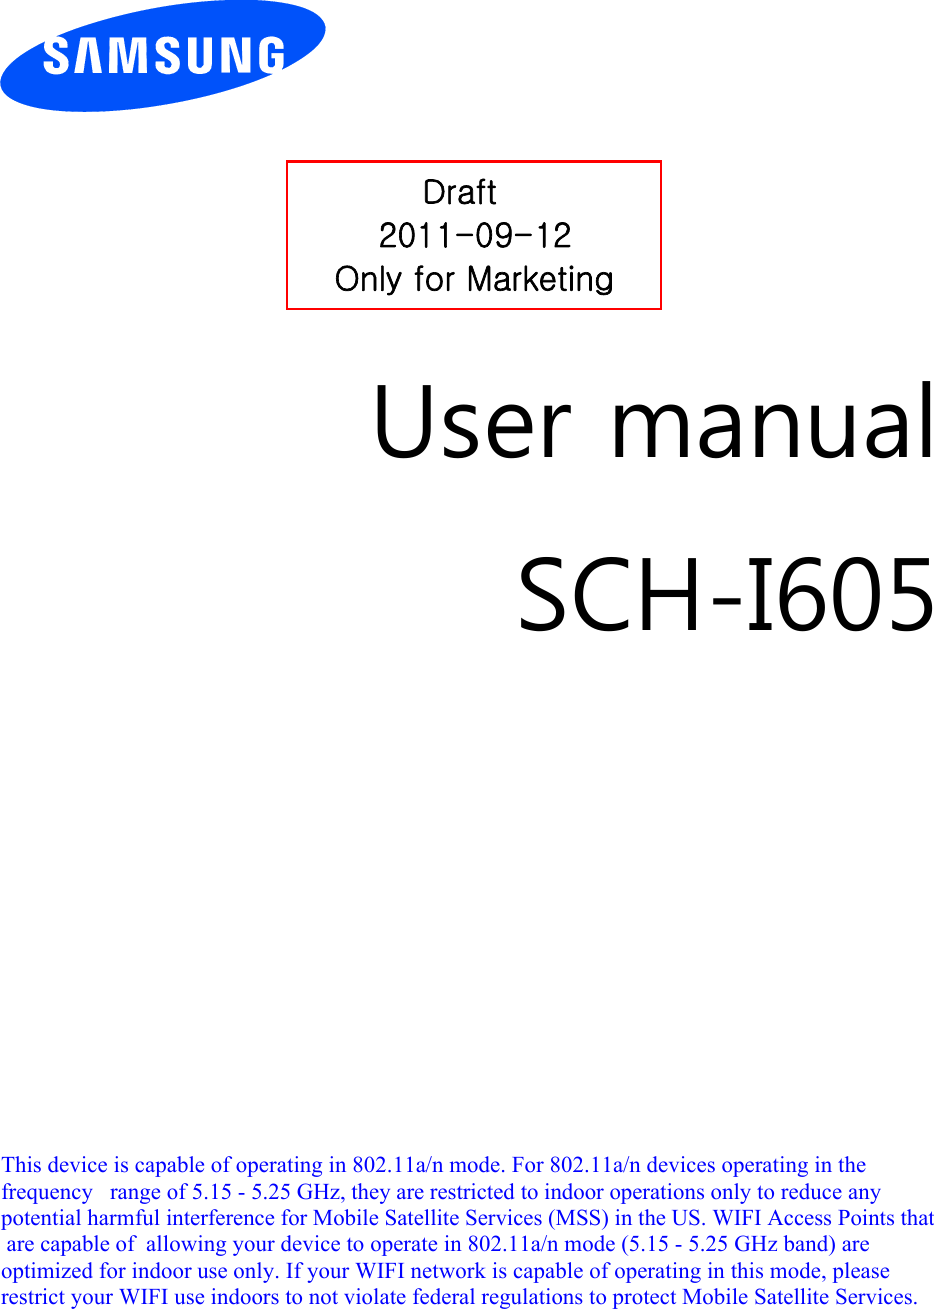          User manual SCH-I605                  Draft 2011-09-12Only for Marketing  This device is capable of operating in 802.11a/n mode. For 802.11a/n devices operating in the frequency   range of 5.15 - 5.25 GHz, they are restricted to indoor operations only to reduce any potential harmful interference for Mobile Satellite Services (MSS) in the US. WIFI Access Points that are capable of  allowing your device to operate in 802.11a/n mode (5.15 - 5.25 GHz band) are optimized for indoor use only. If your WIFI network is capable of operating in this mode, please restrict your WIFI use indoors to not violate federal regulations to protect Mobile Satellite Services.  